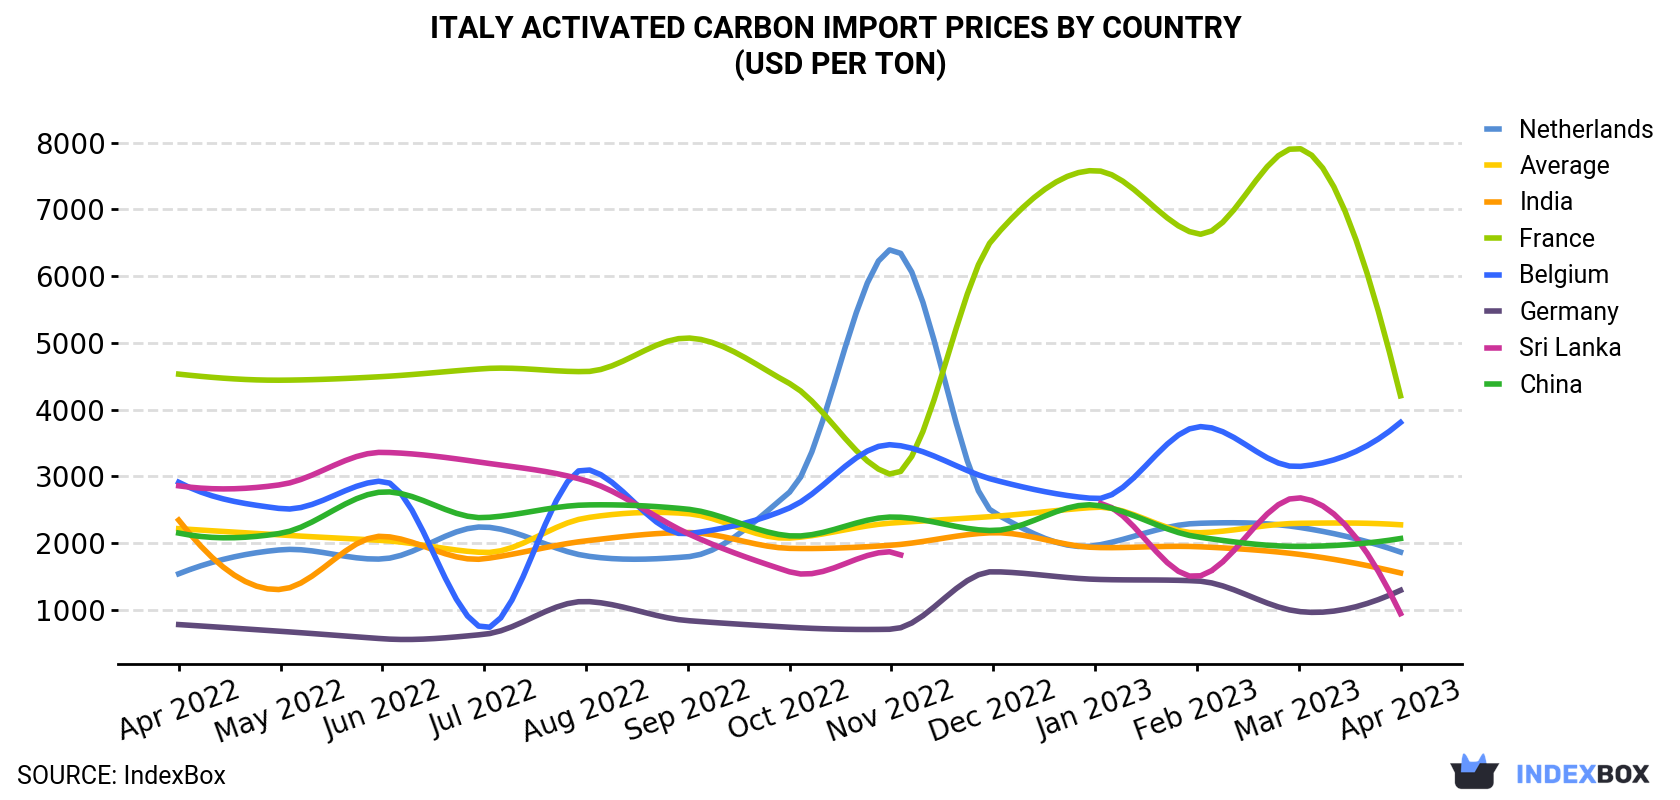 Italy Activated Carbon Import Prices By Country (USD Per Ton)